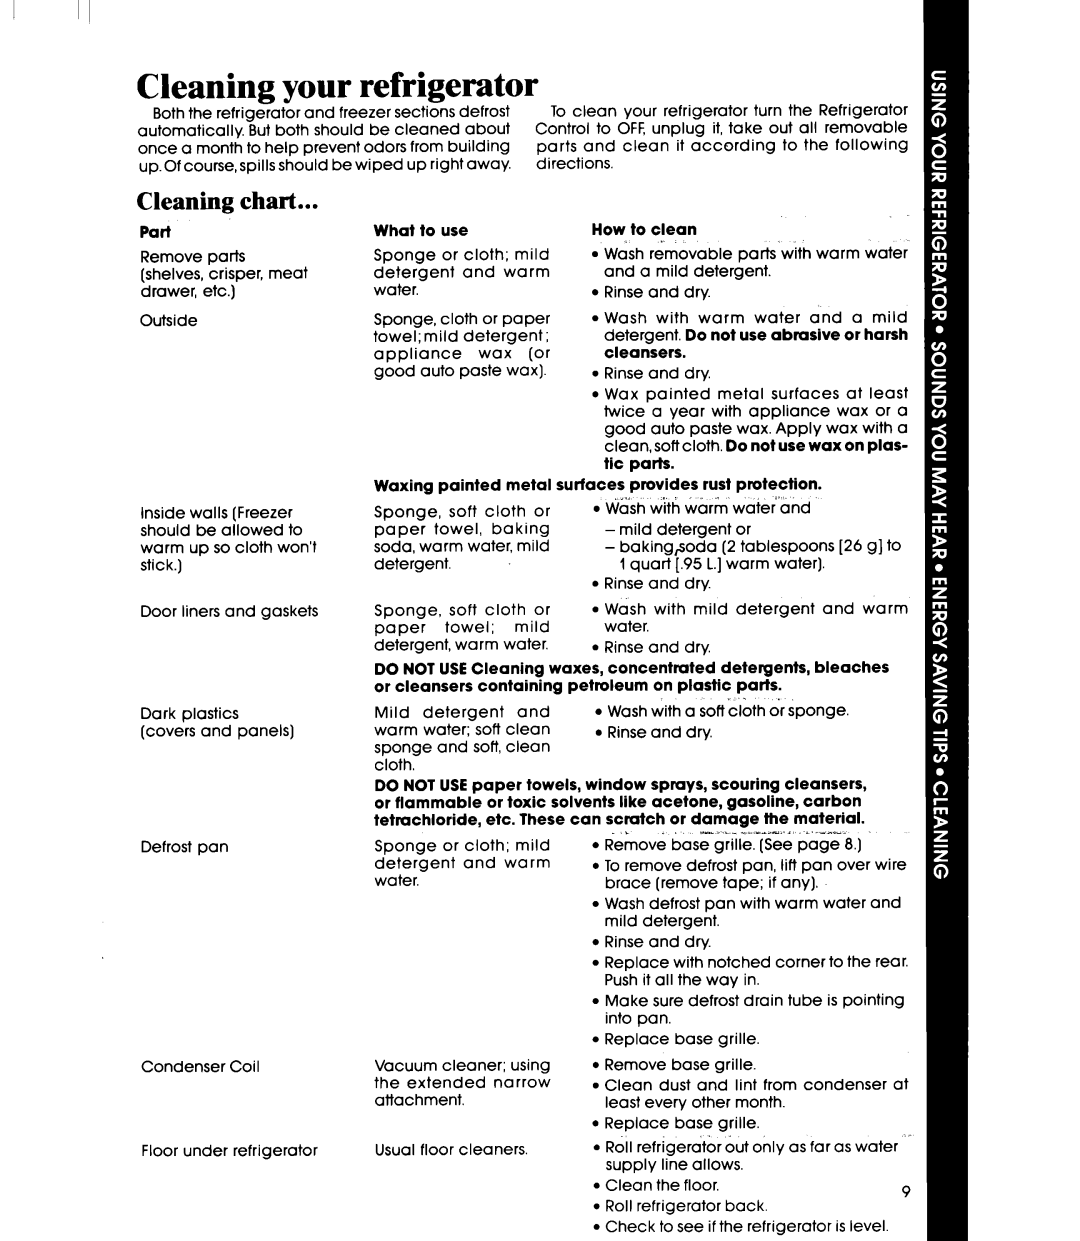 Whirlpool ED22PM manual Cleaning your refrigerator, Cleaning chart 